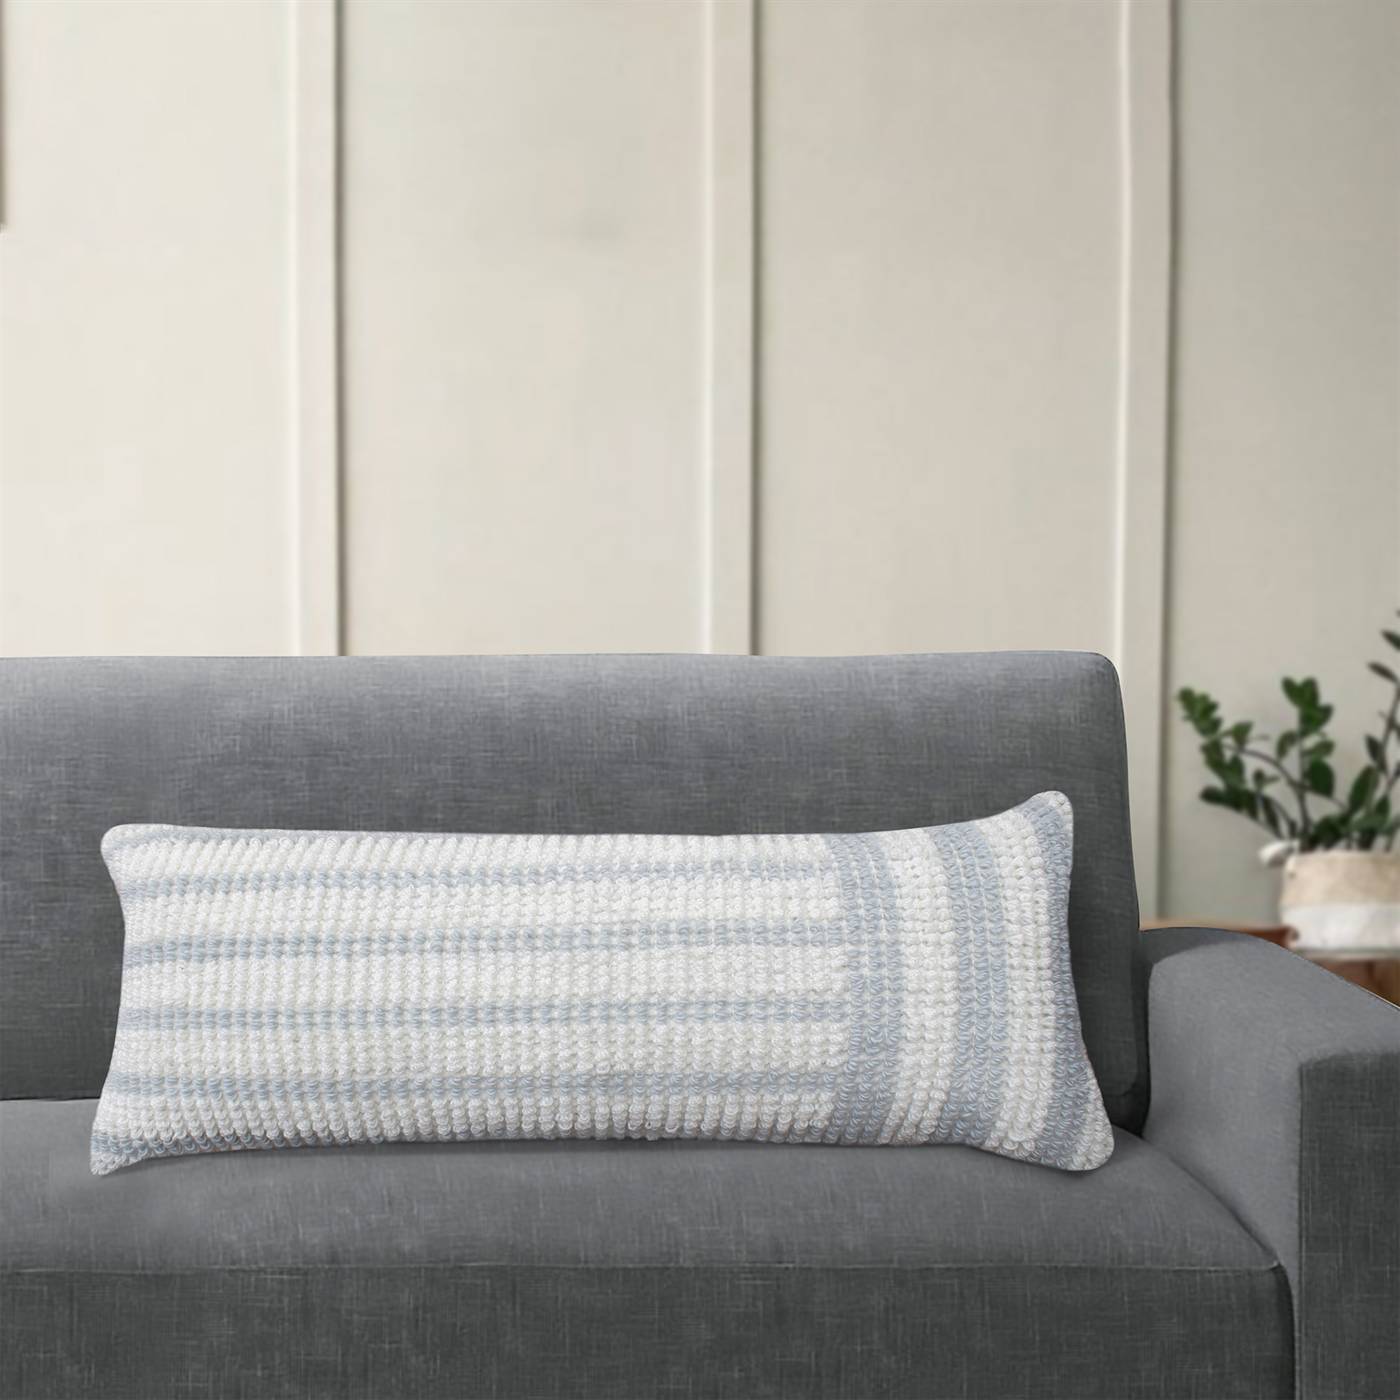 Beatrice Lumber Cushion, 36x91 cm, Natural White, Lt. Blue, NZ Wool, PET, Hand Woven, Pitloom, All Loop